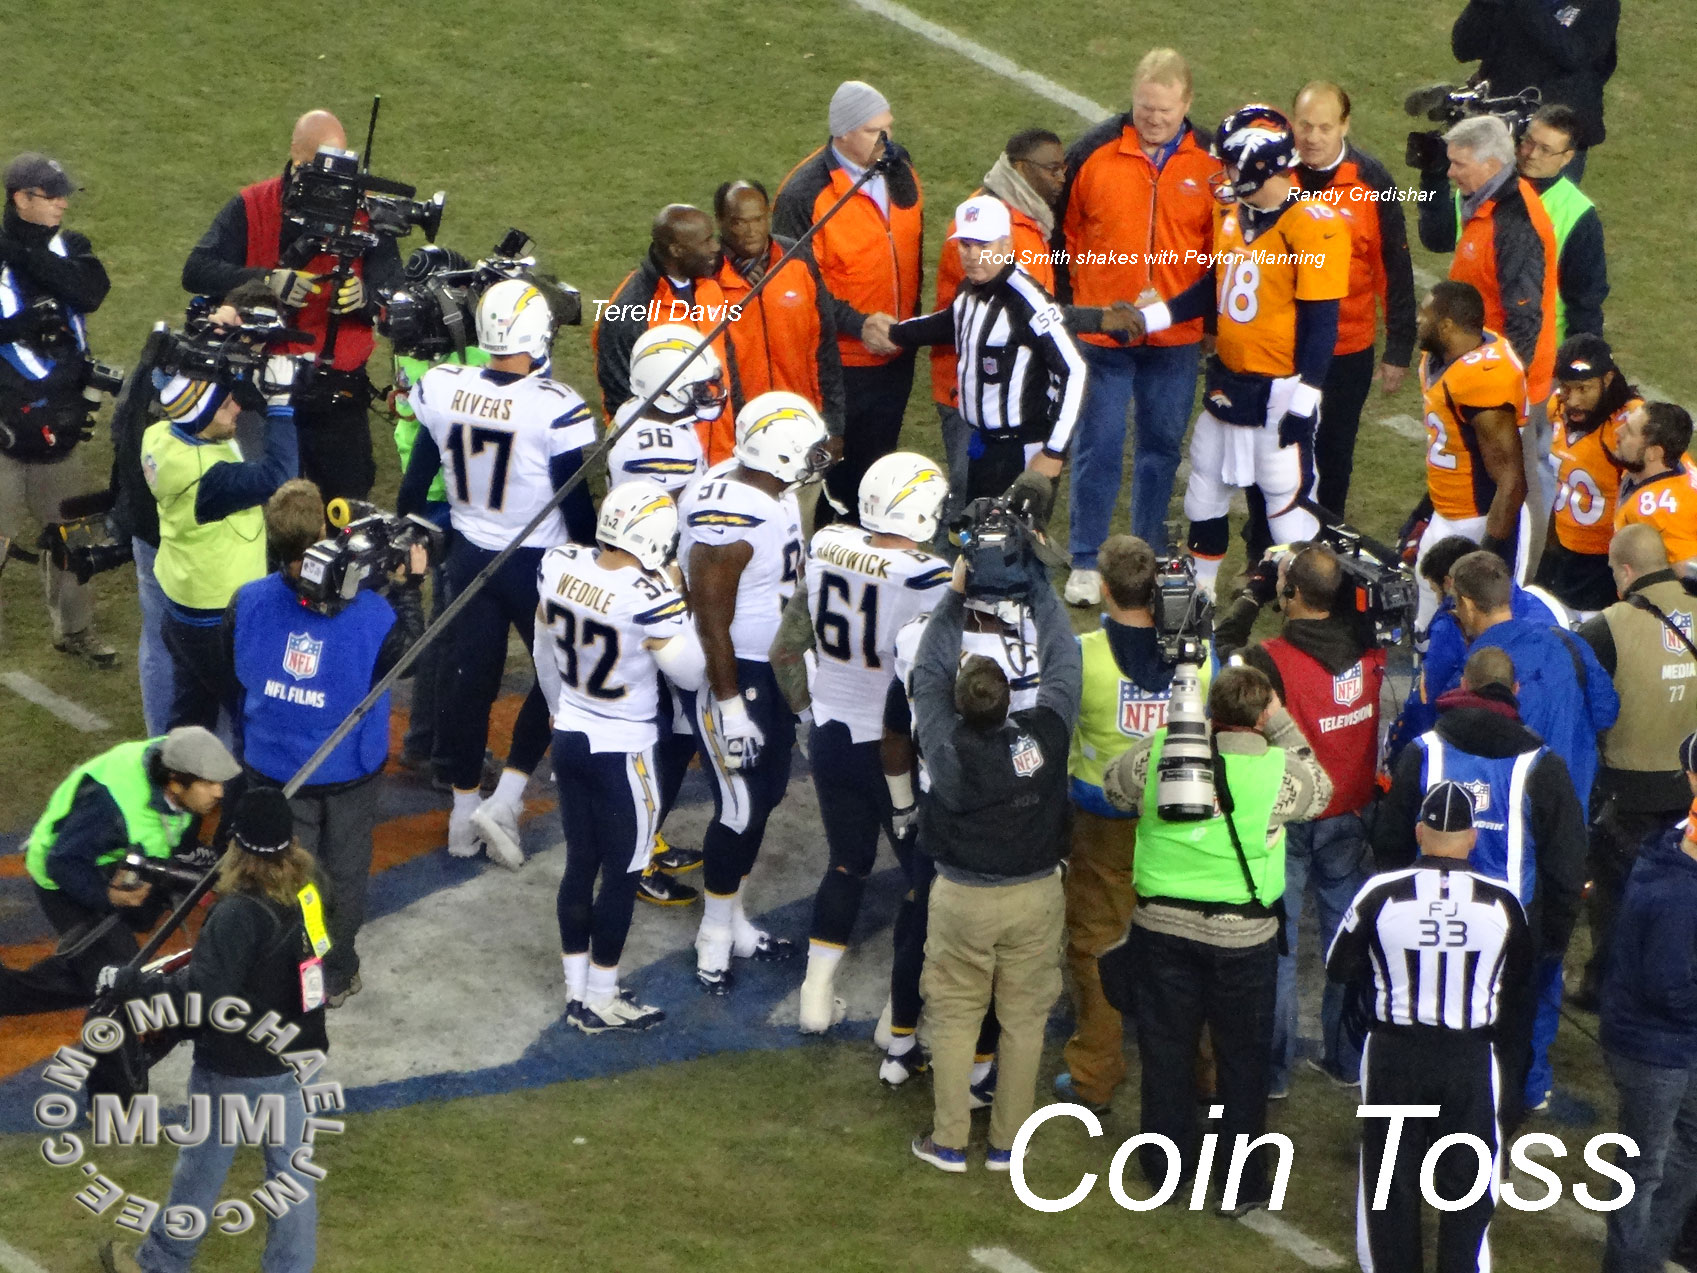 Chargers @ Broncos 12/12/13 - michaeljmcgee.com